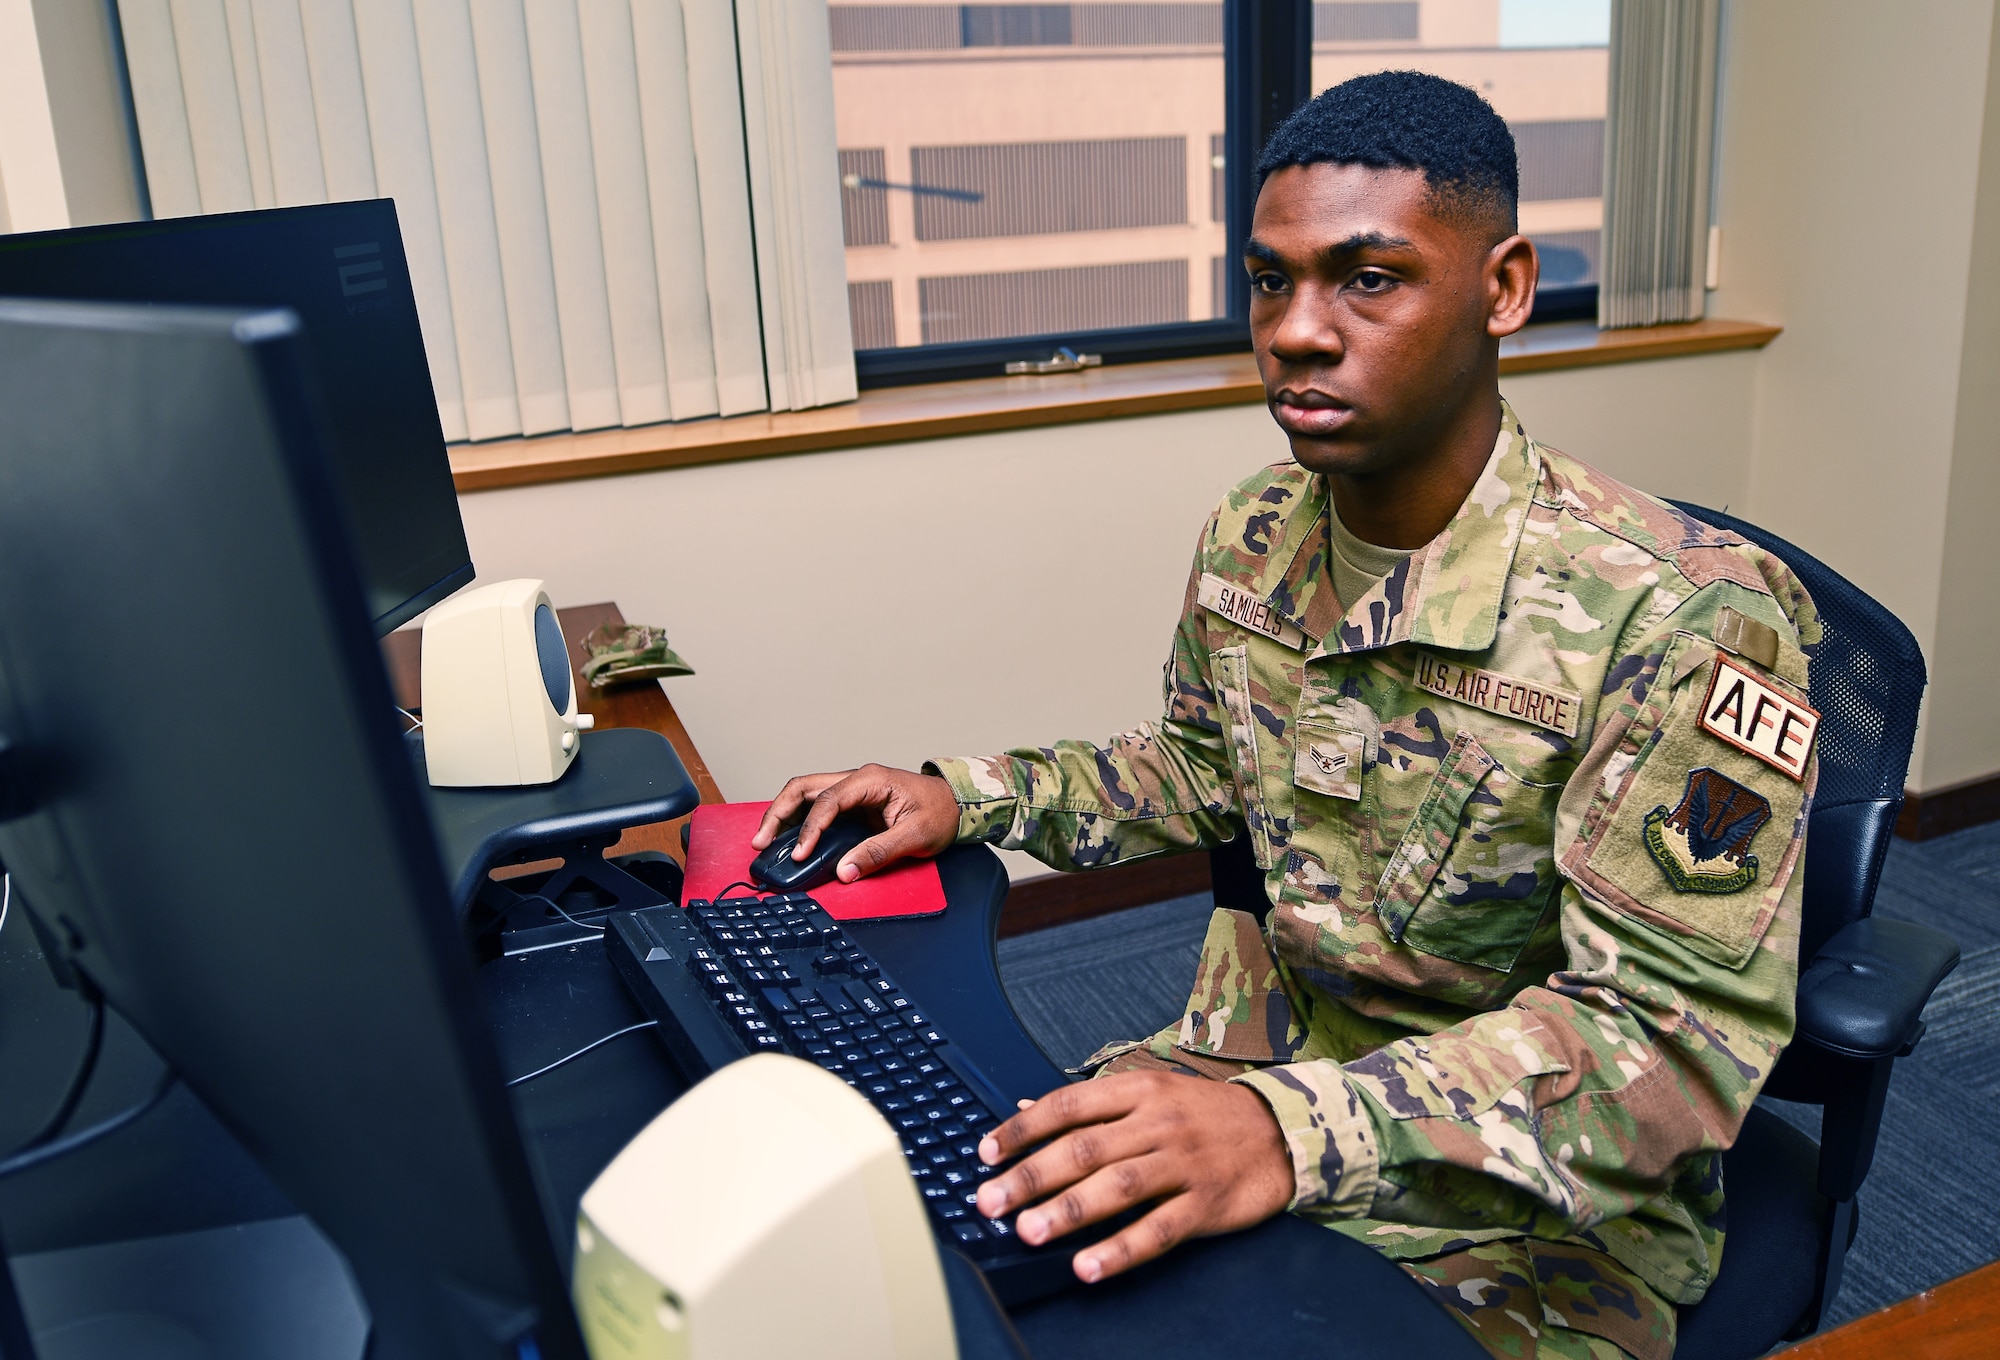 70th ISRW amputee Airman hopes to return to active duty, soccer and deploy  > Air Force > Article Display